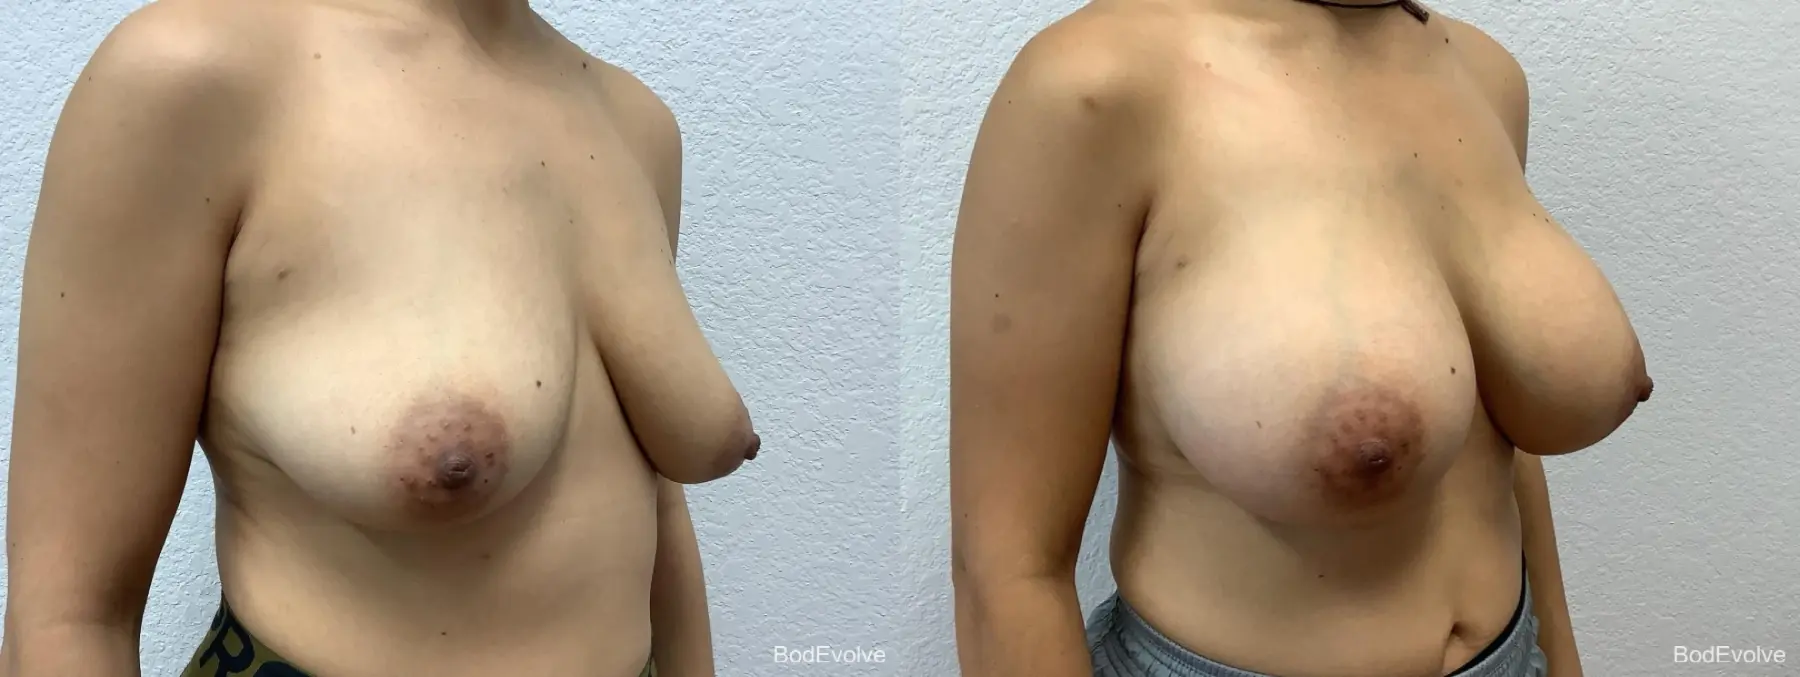 Breast Augmentation: Patient 5 - Before and After 4